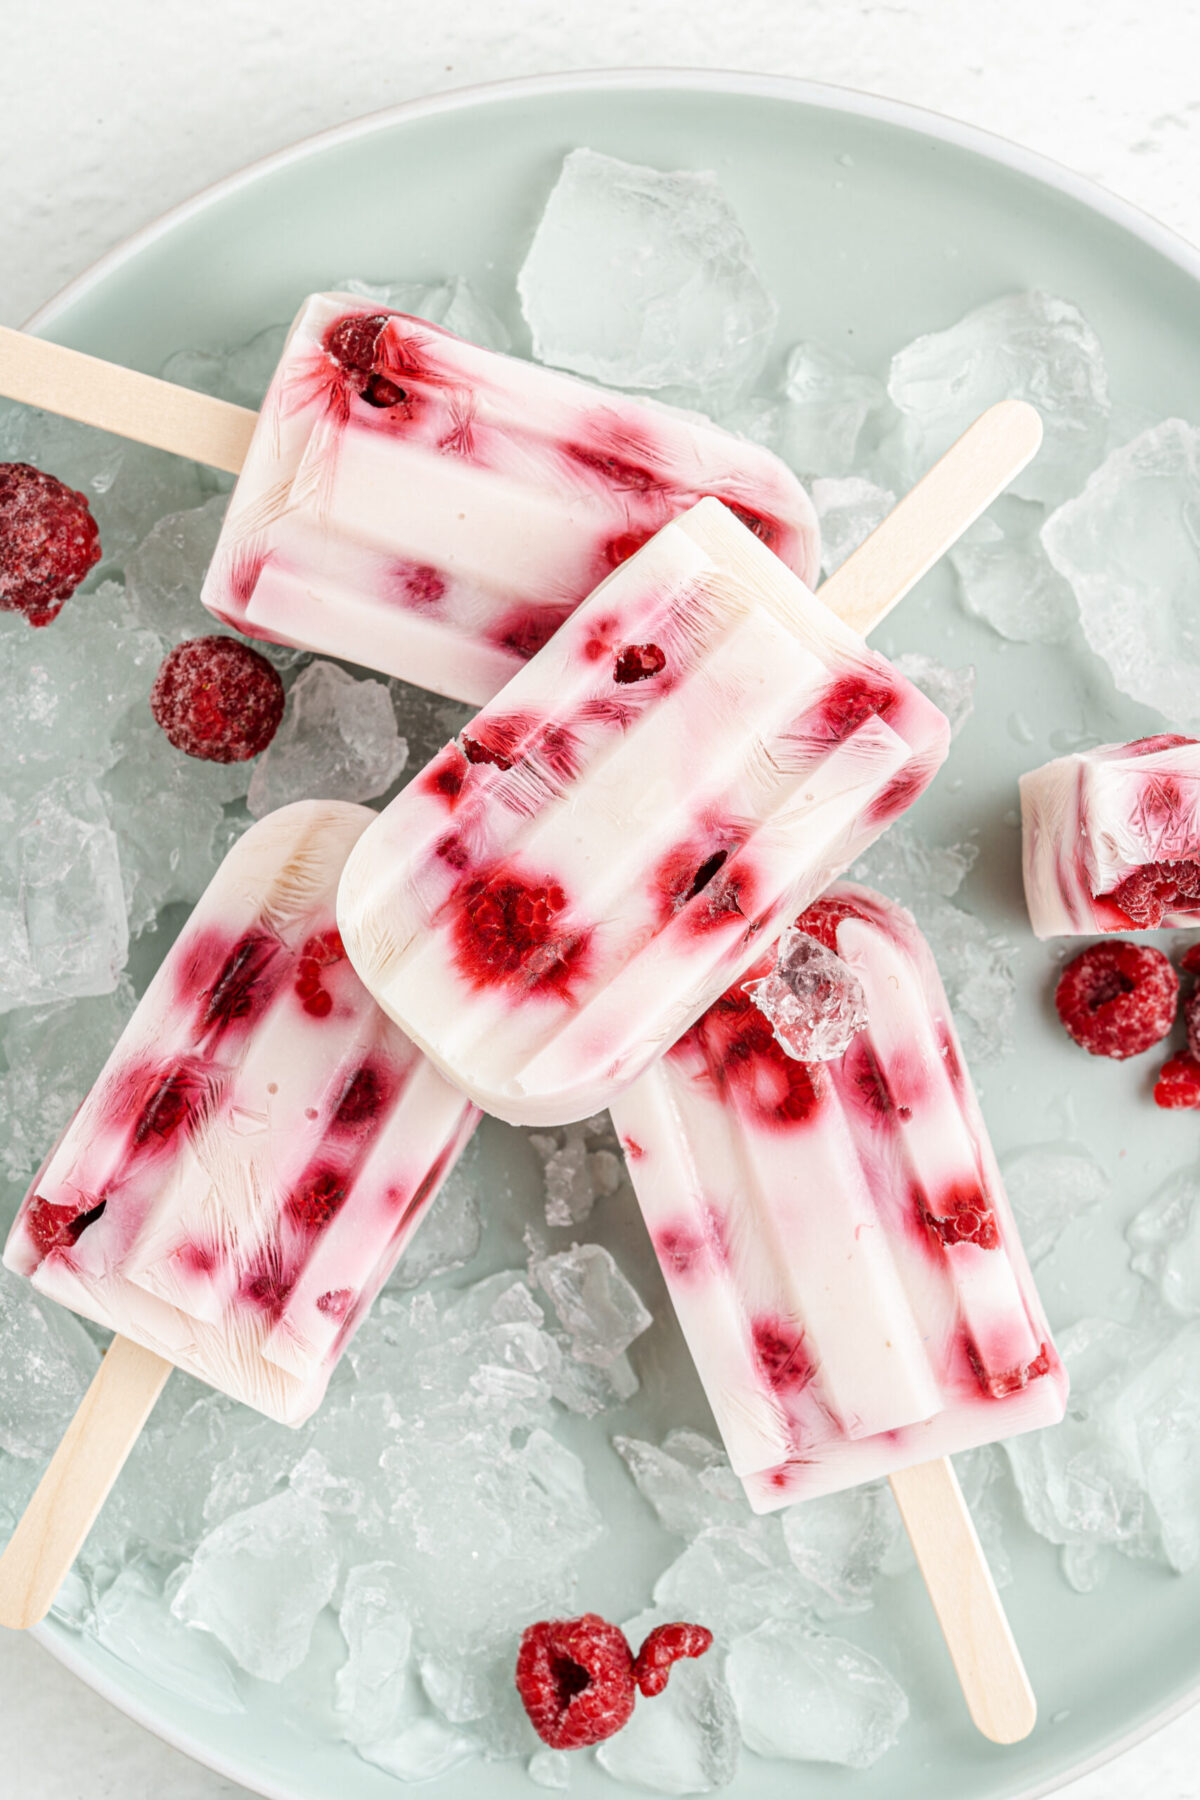 With just four simple, wholesome ingredients, these delicious and healthy Raspberry Yogurt Popsicles are so easy to make!